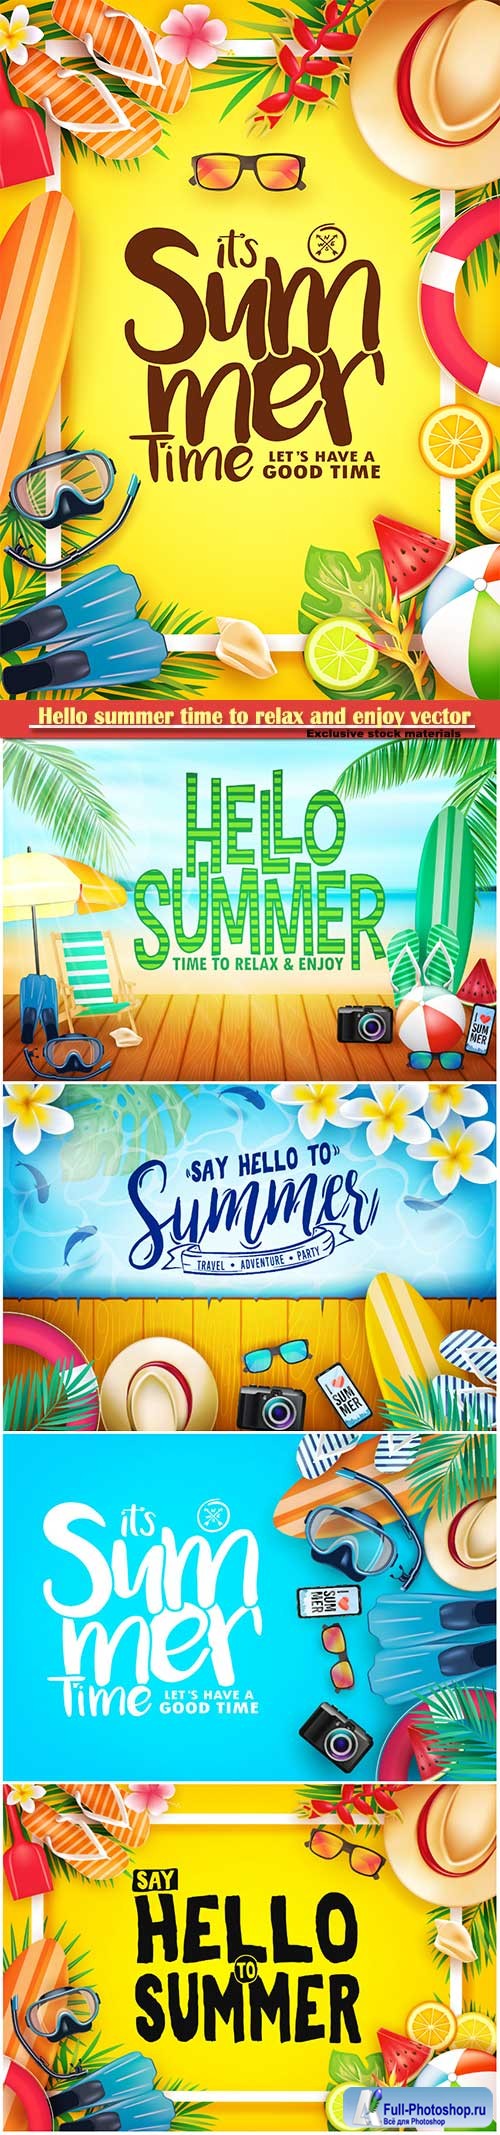 Hello summer time to relax and enjoy vector illustration